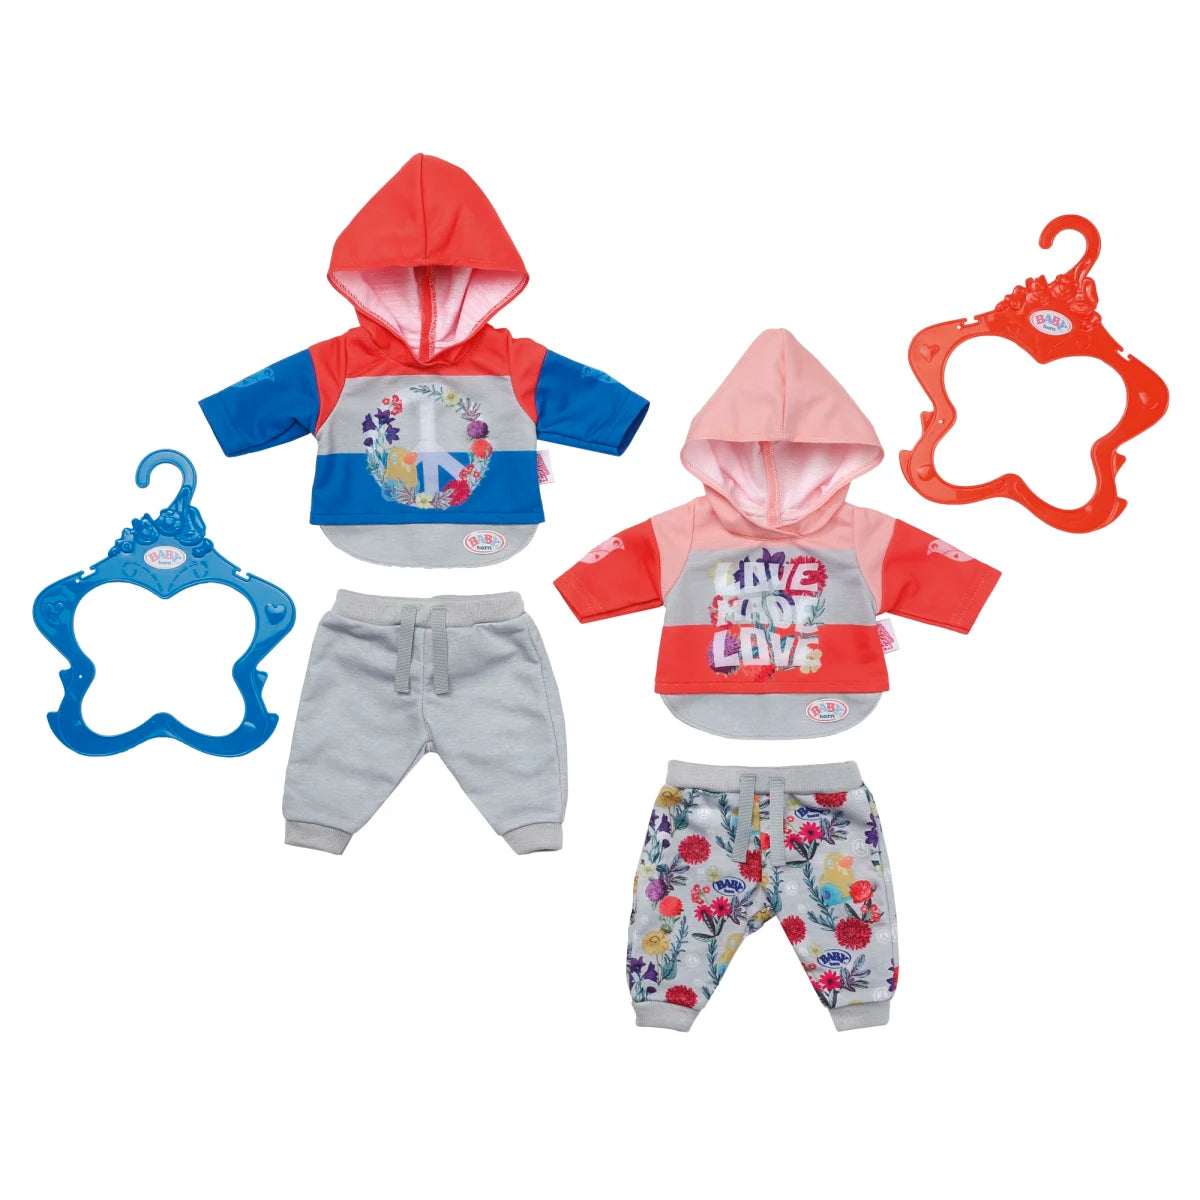 BABY born Boy Outfit 2 assorted